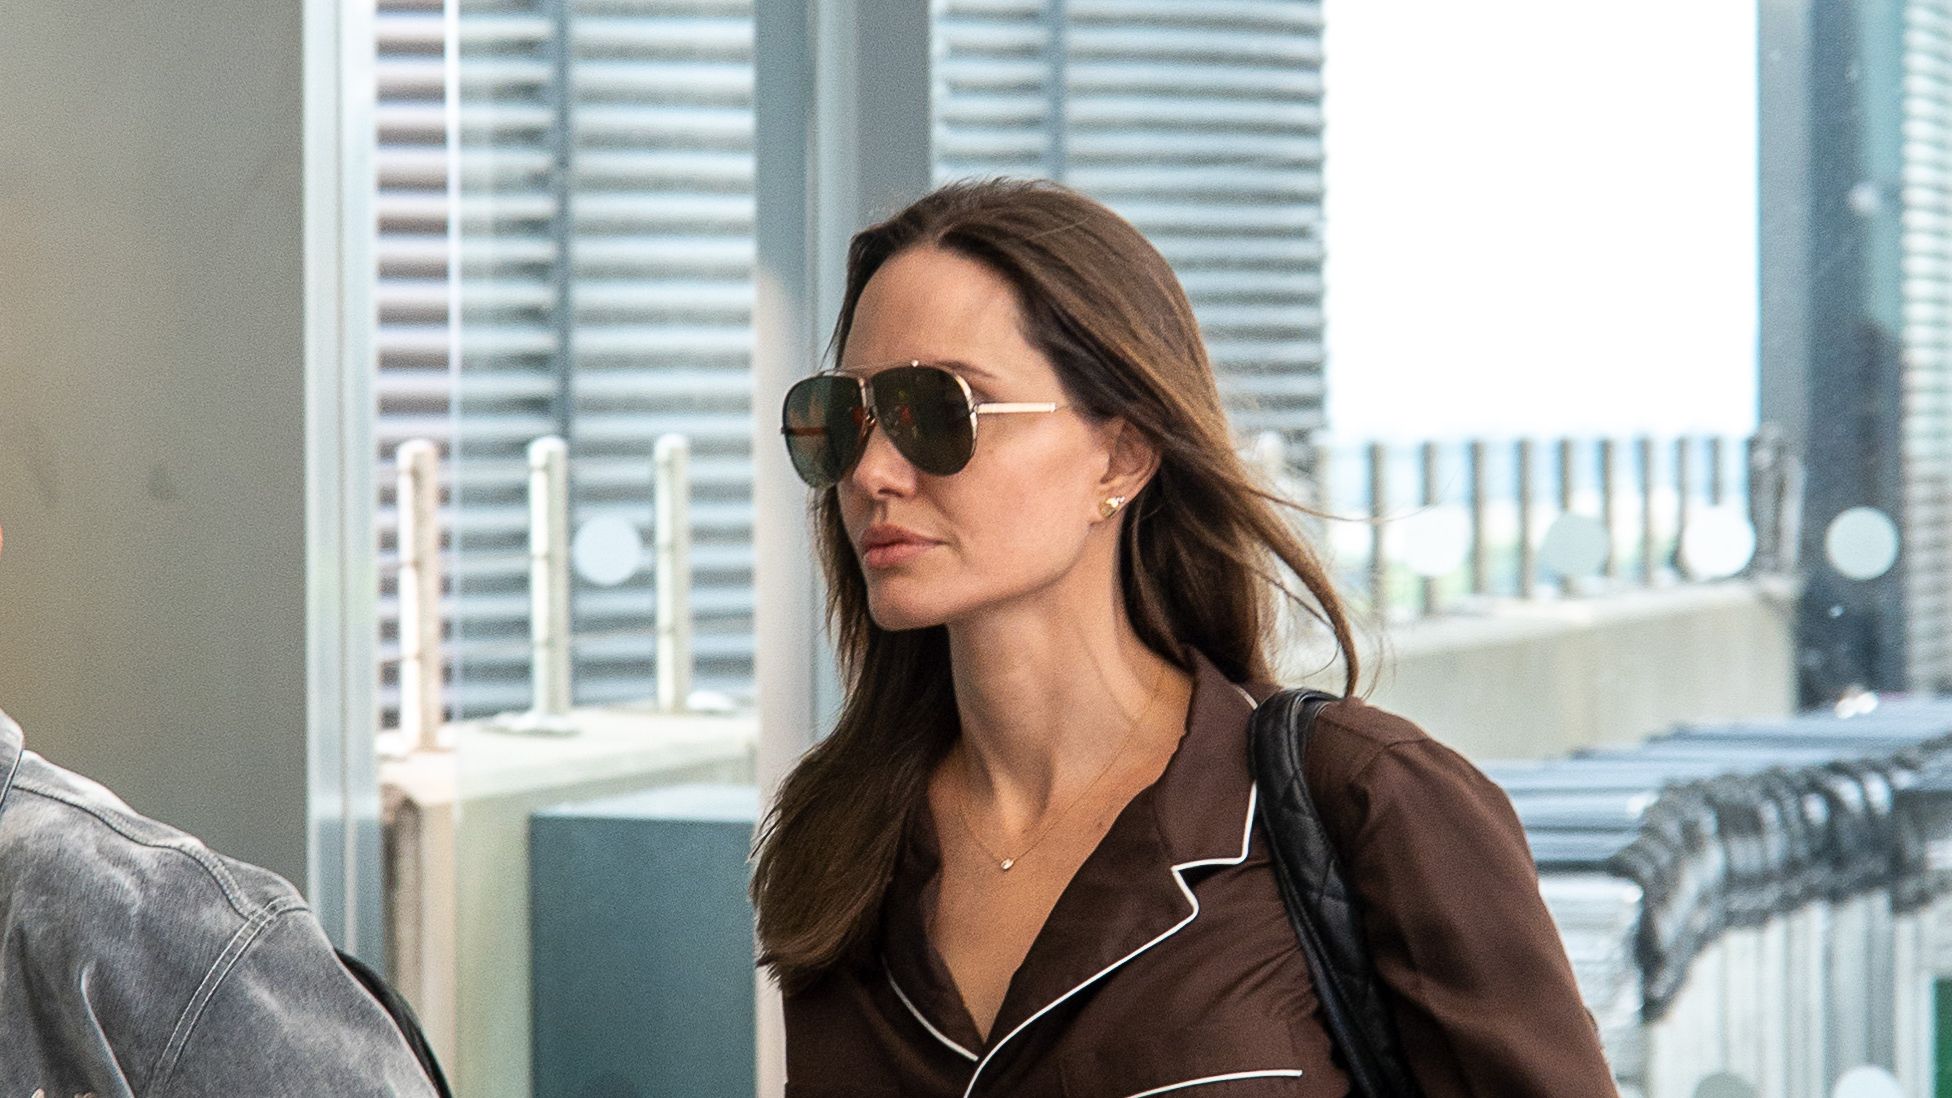 Actress Angelina Jolie walks with a Louis Vuitton bag in the